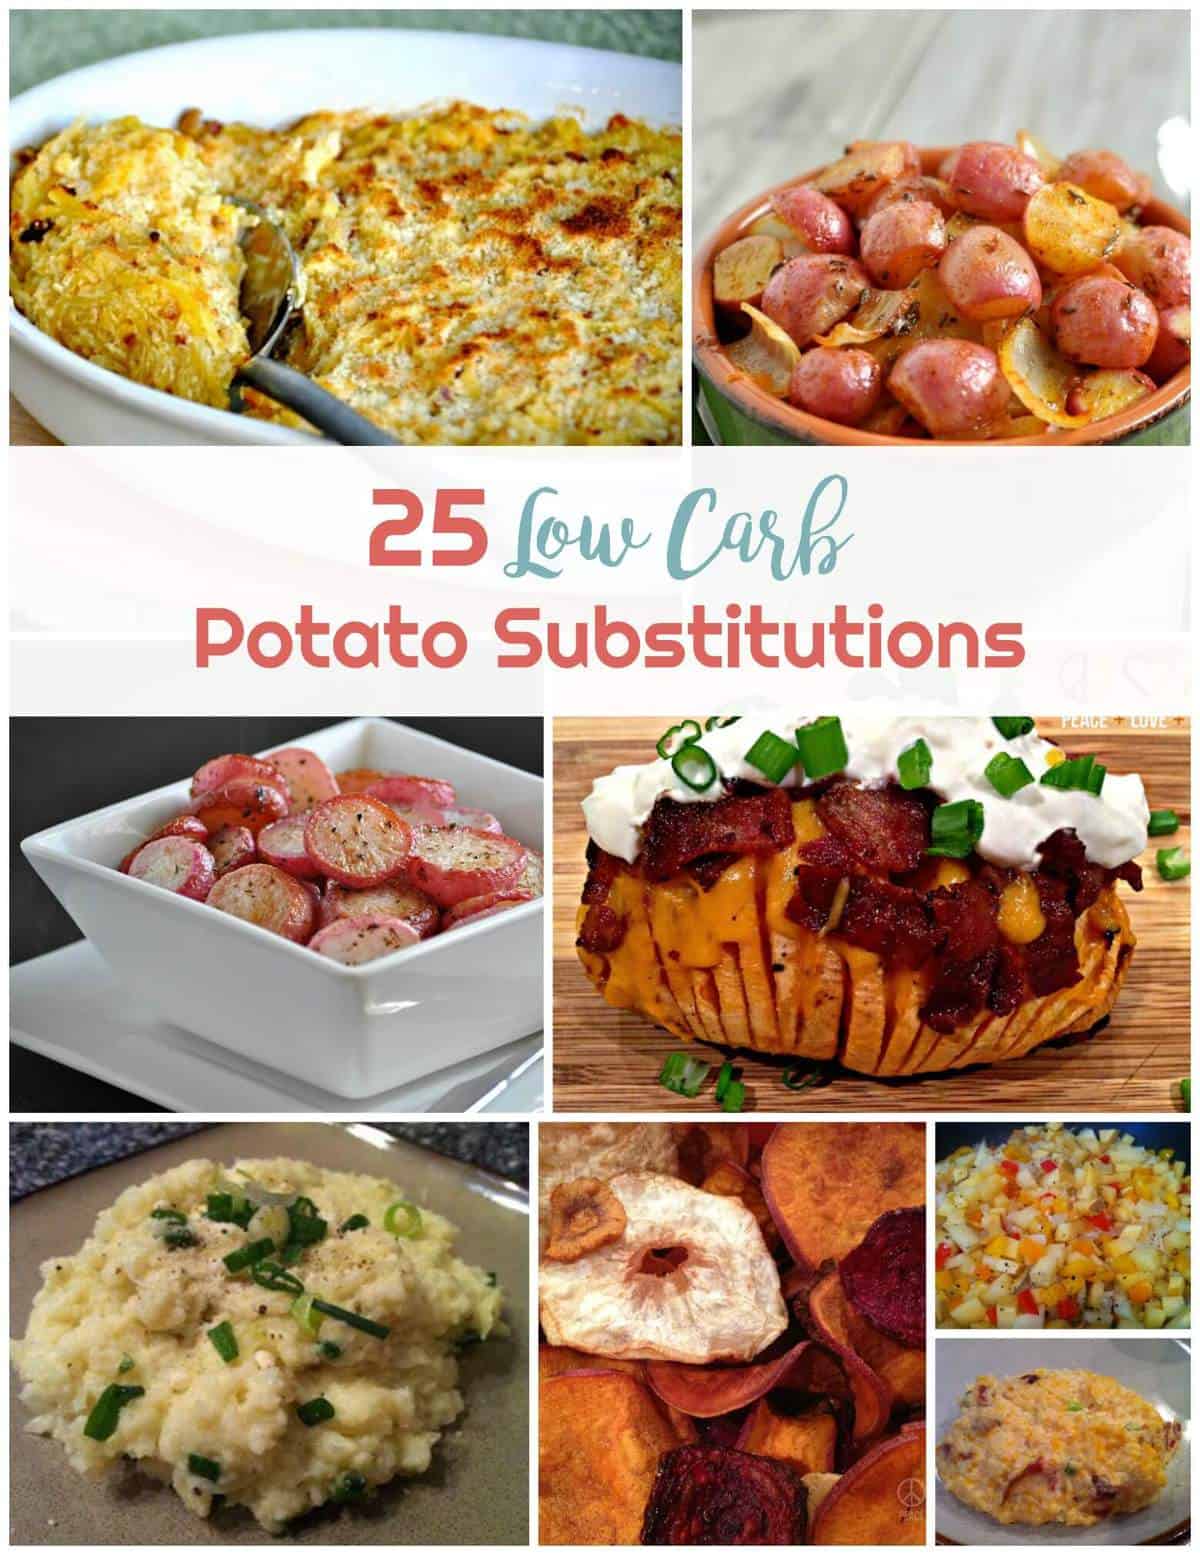 25 Low Carb Potato Substitutions | Healthy Living in Body and Mind